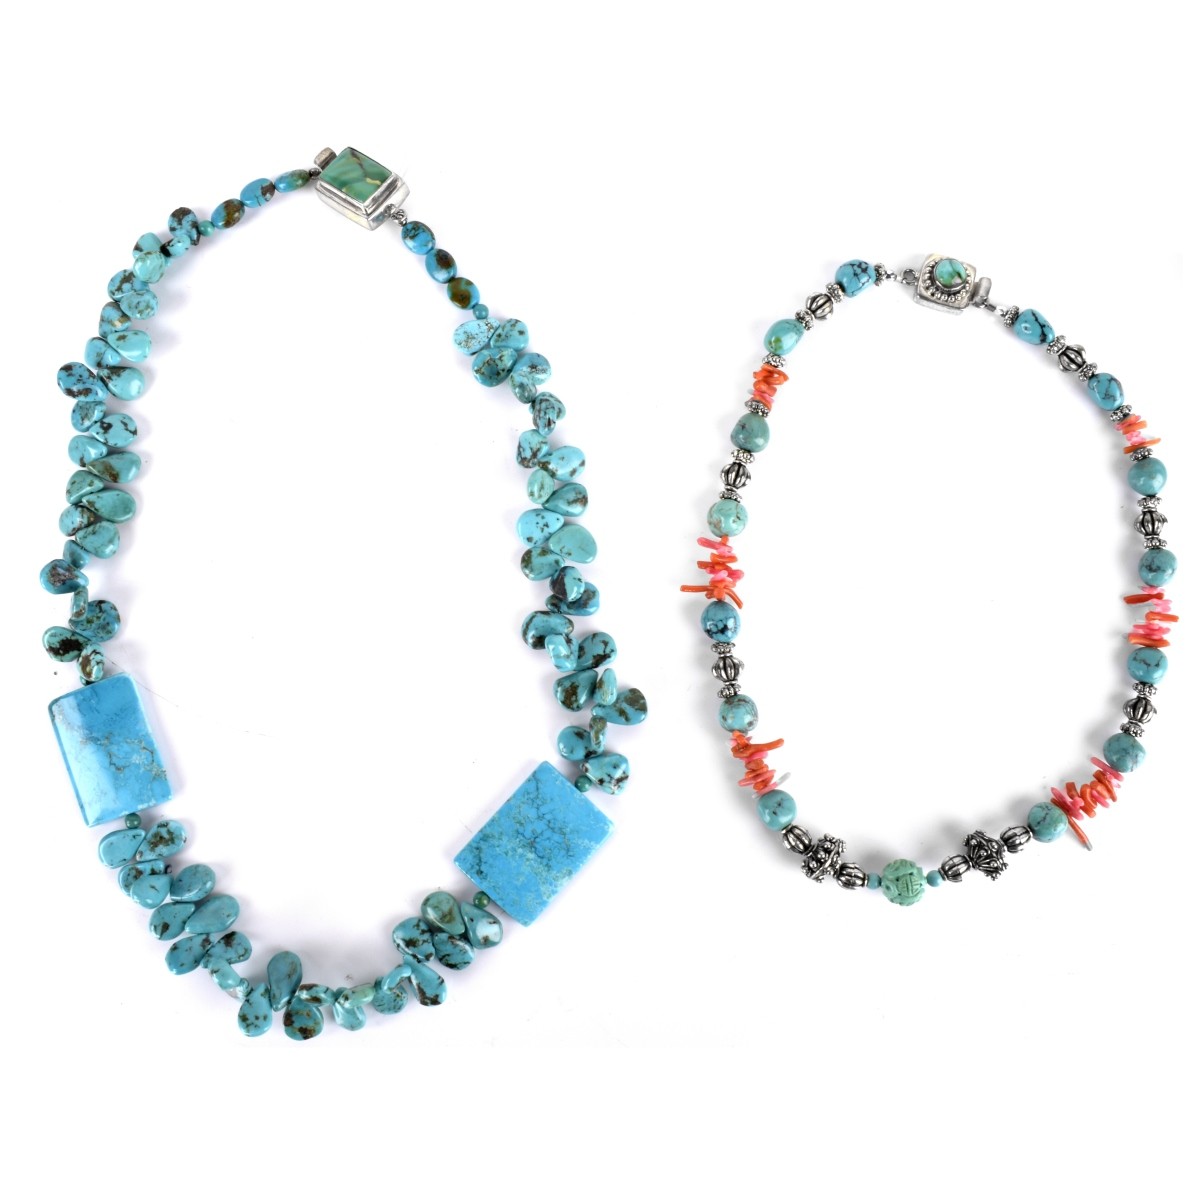 Turquoise Beaded Necklaces with Sterling Clasps